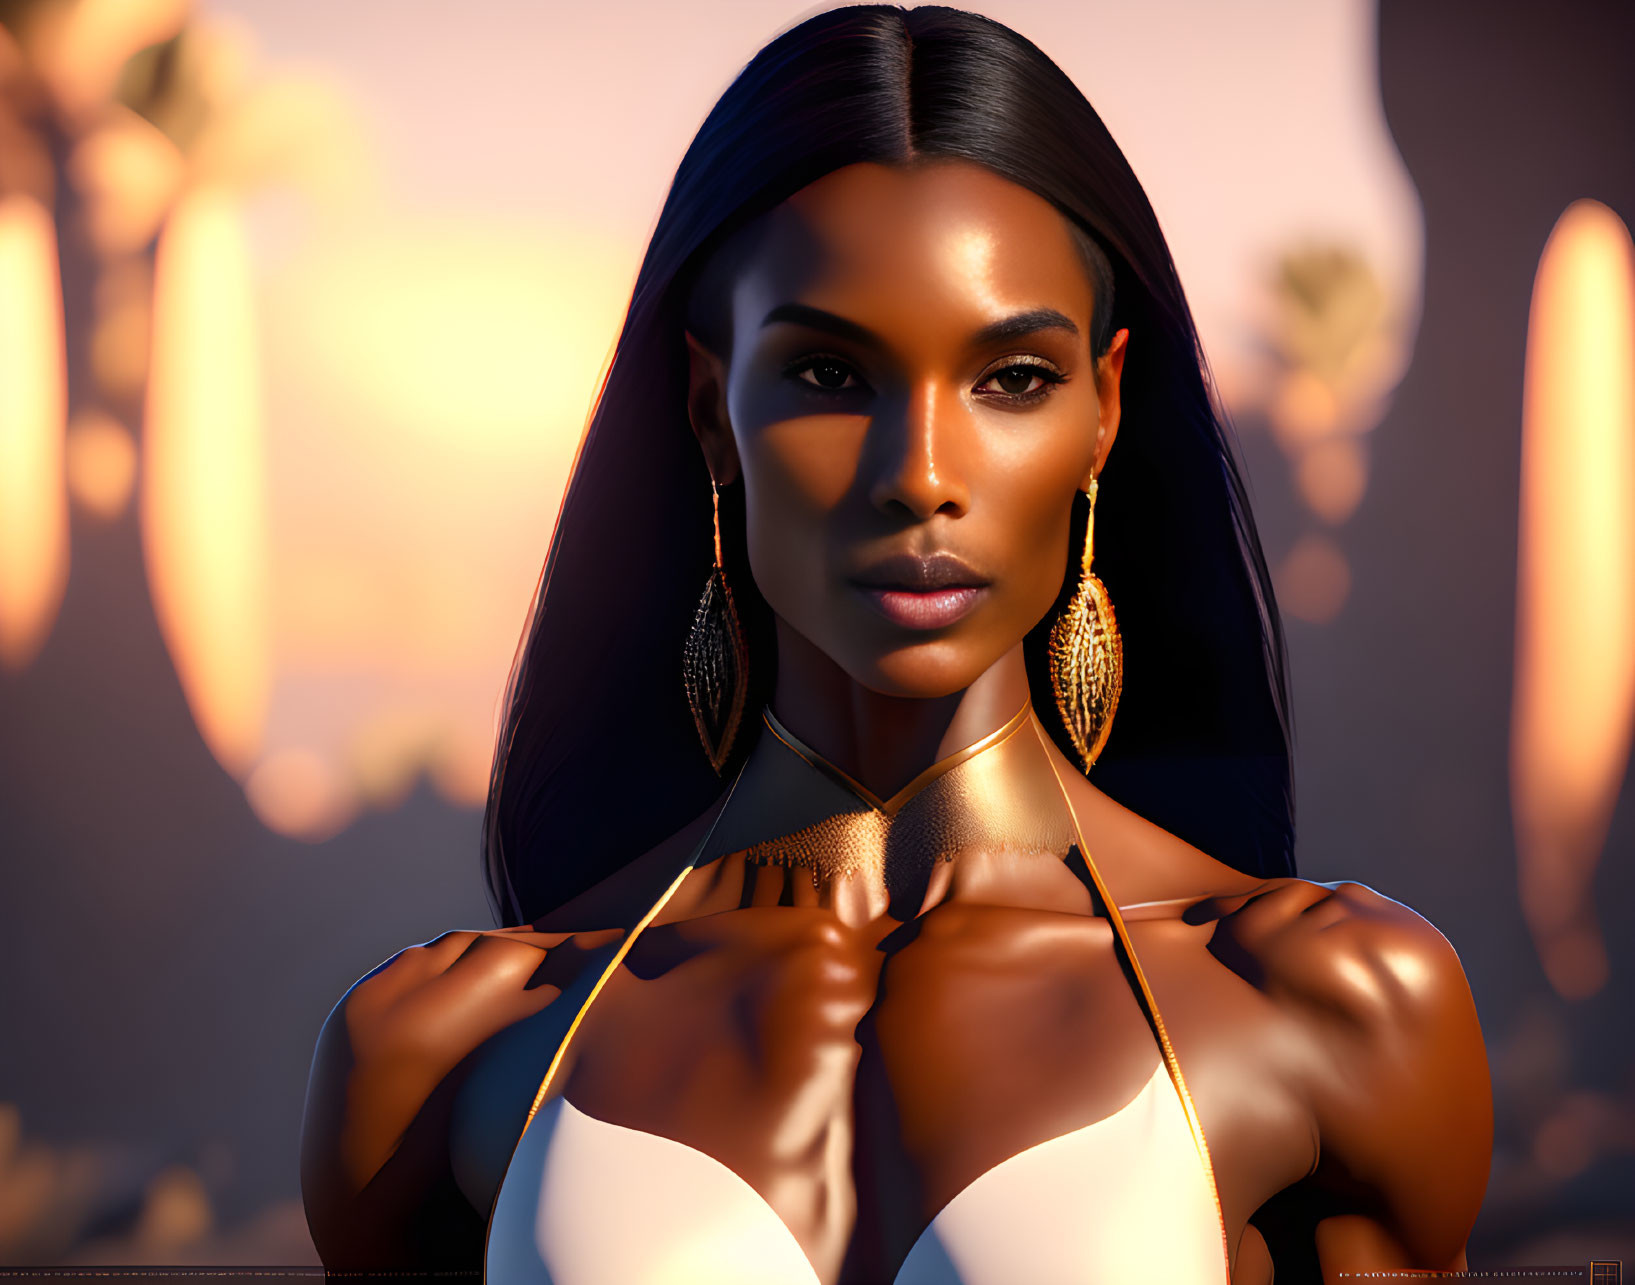 Confident woman with sleek hair and golden earrings in sunset backdrop